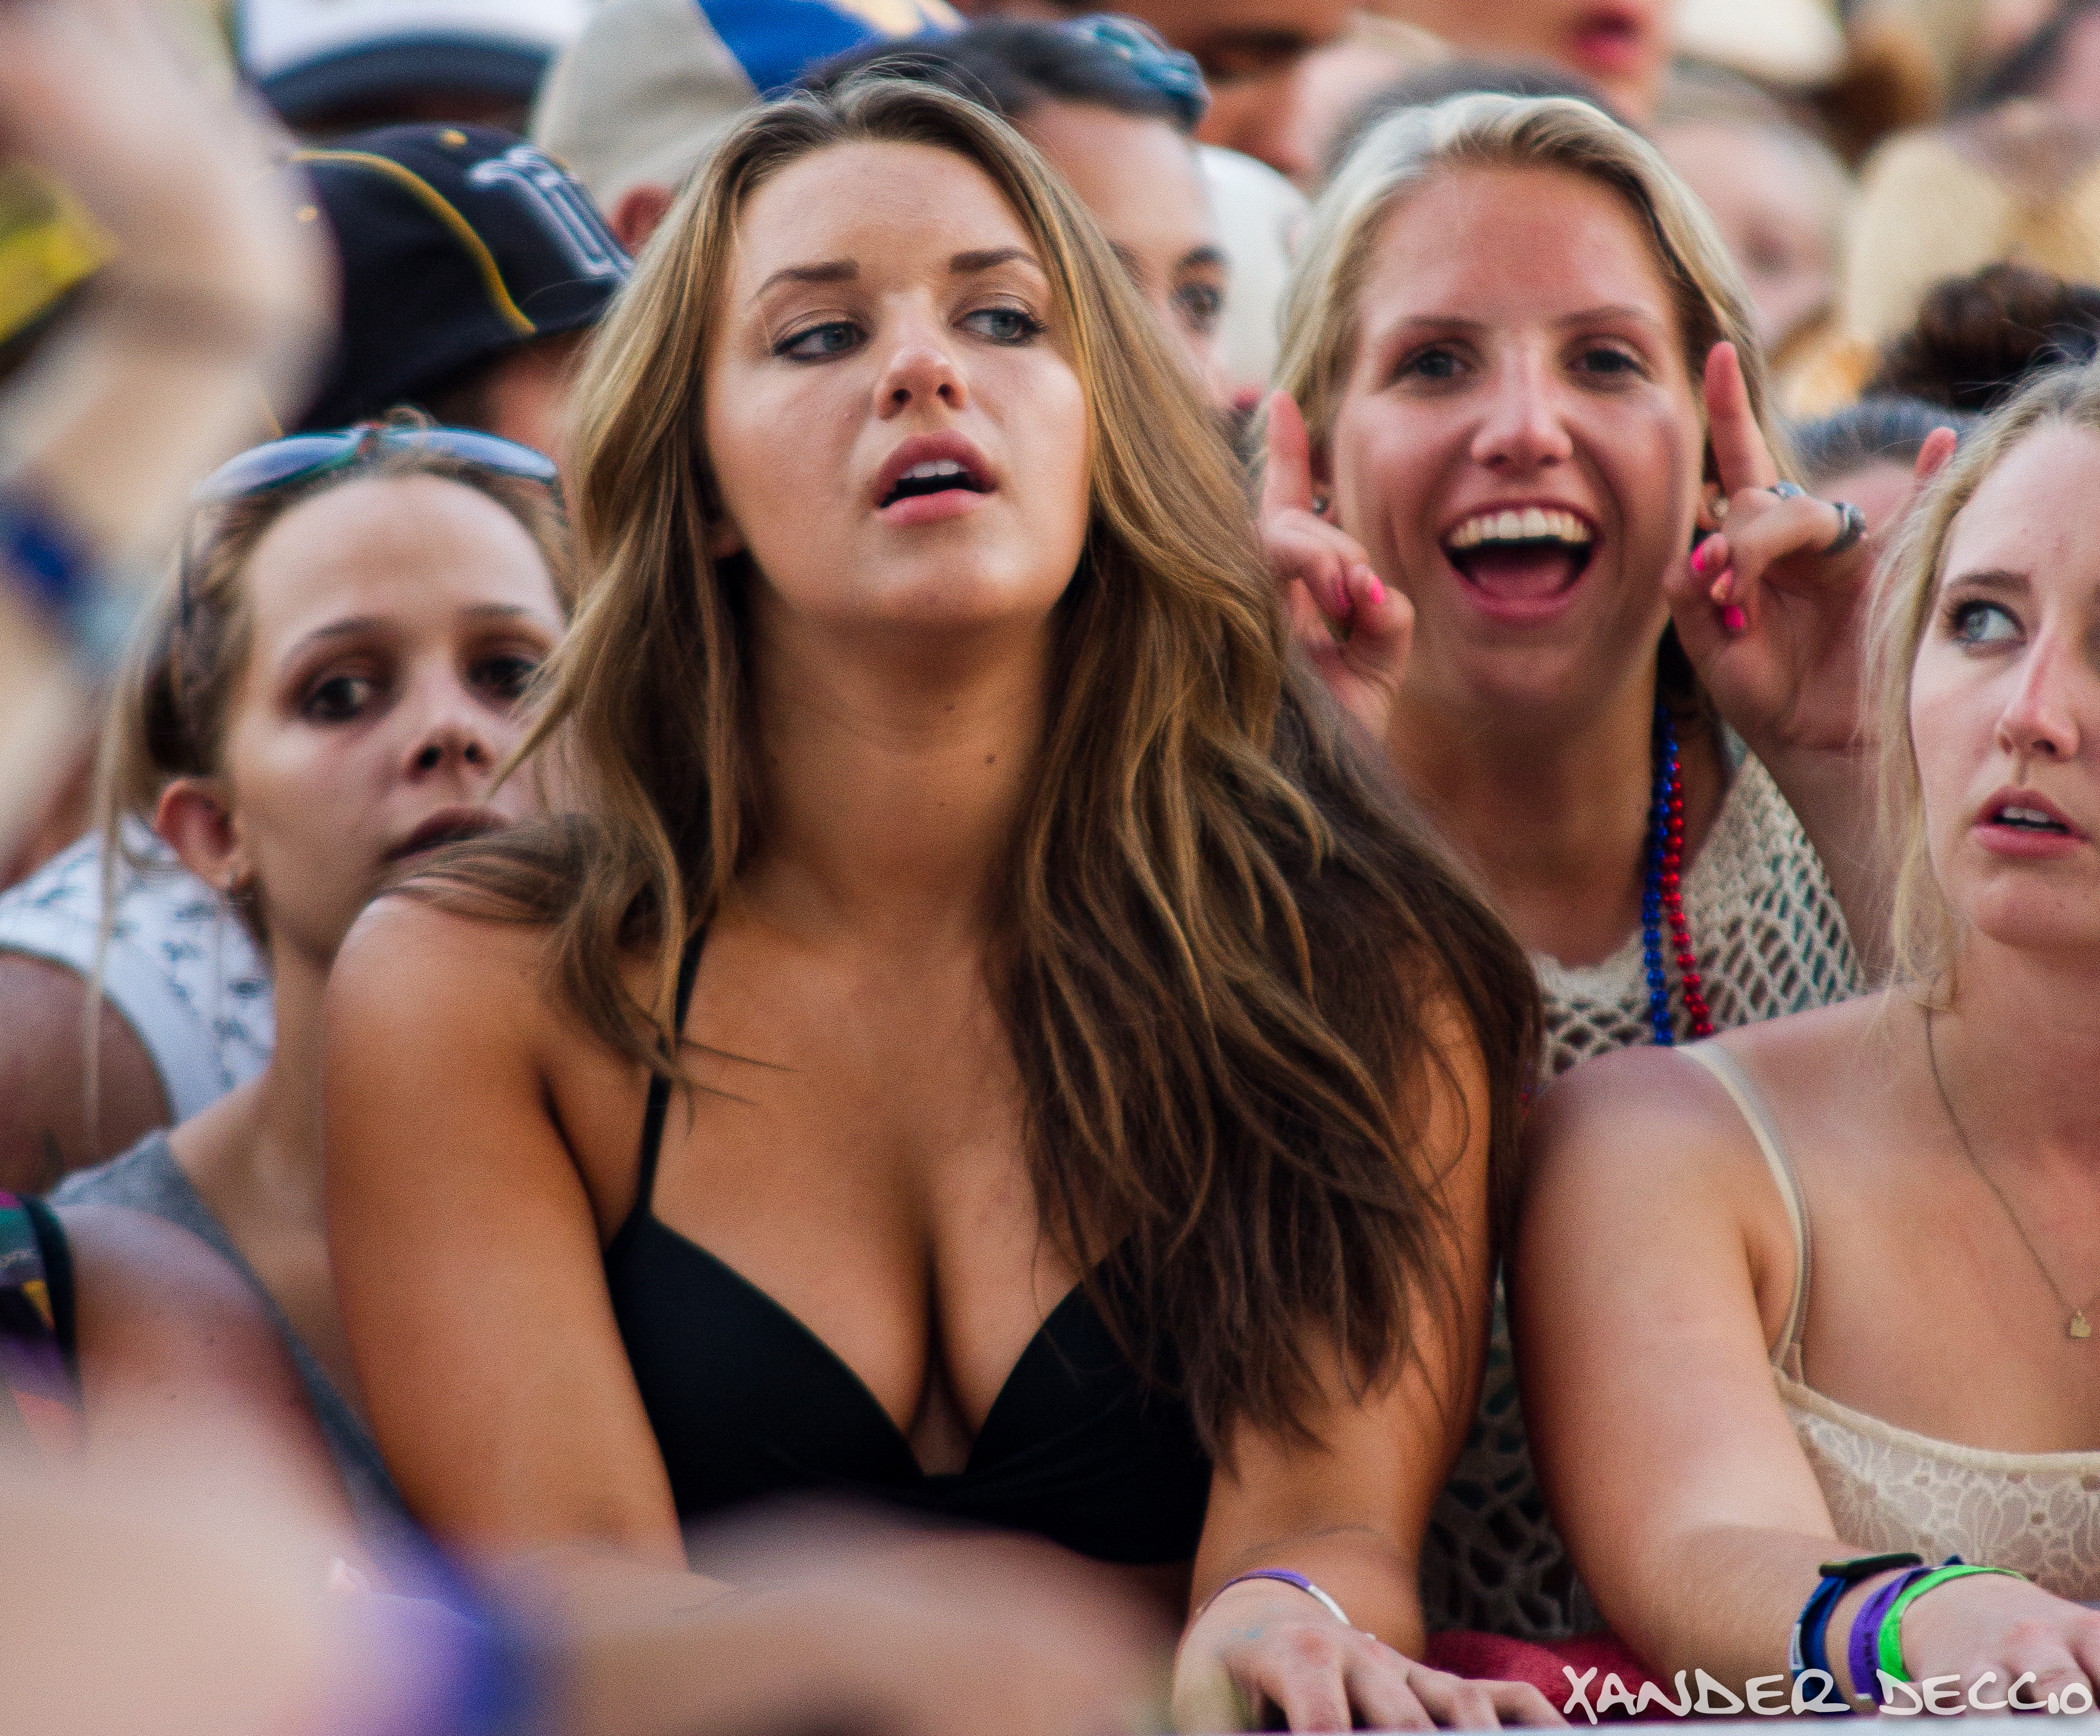 Fans at Watershed 2014 (Photo by Xander Deccio)